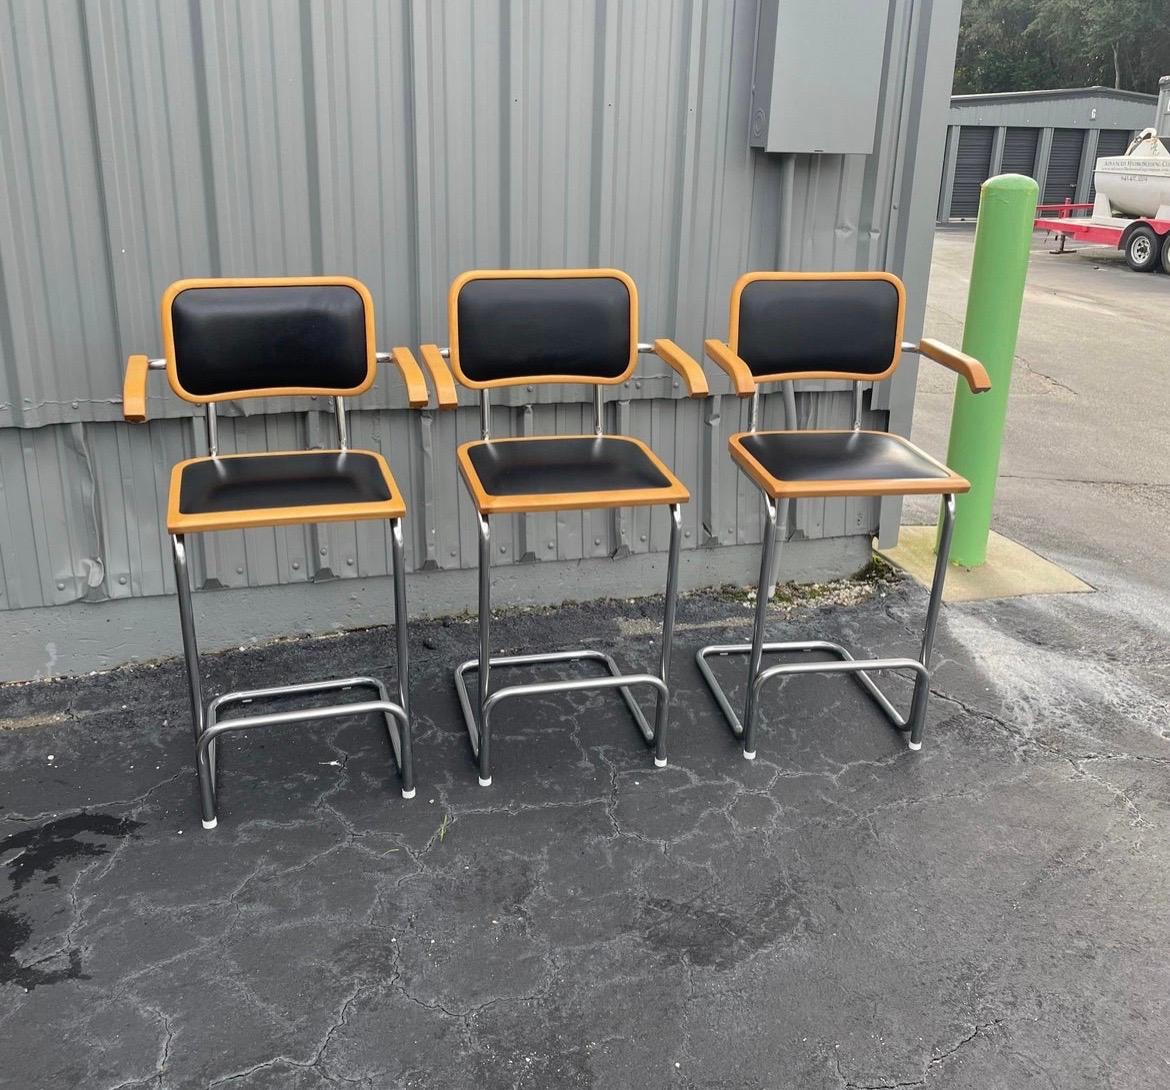 Set of three Marcel Breuer style Cantilever bar stools with black vinyl upholstery. Made by Falcon Products Inc. with the labels still attached. There is also a Made in Italy sticker on two of the chairs. 

Chairs are in overall good condition, with